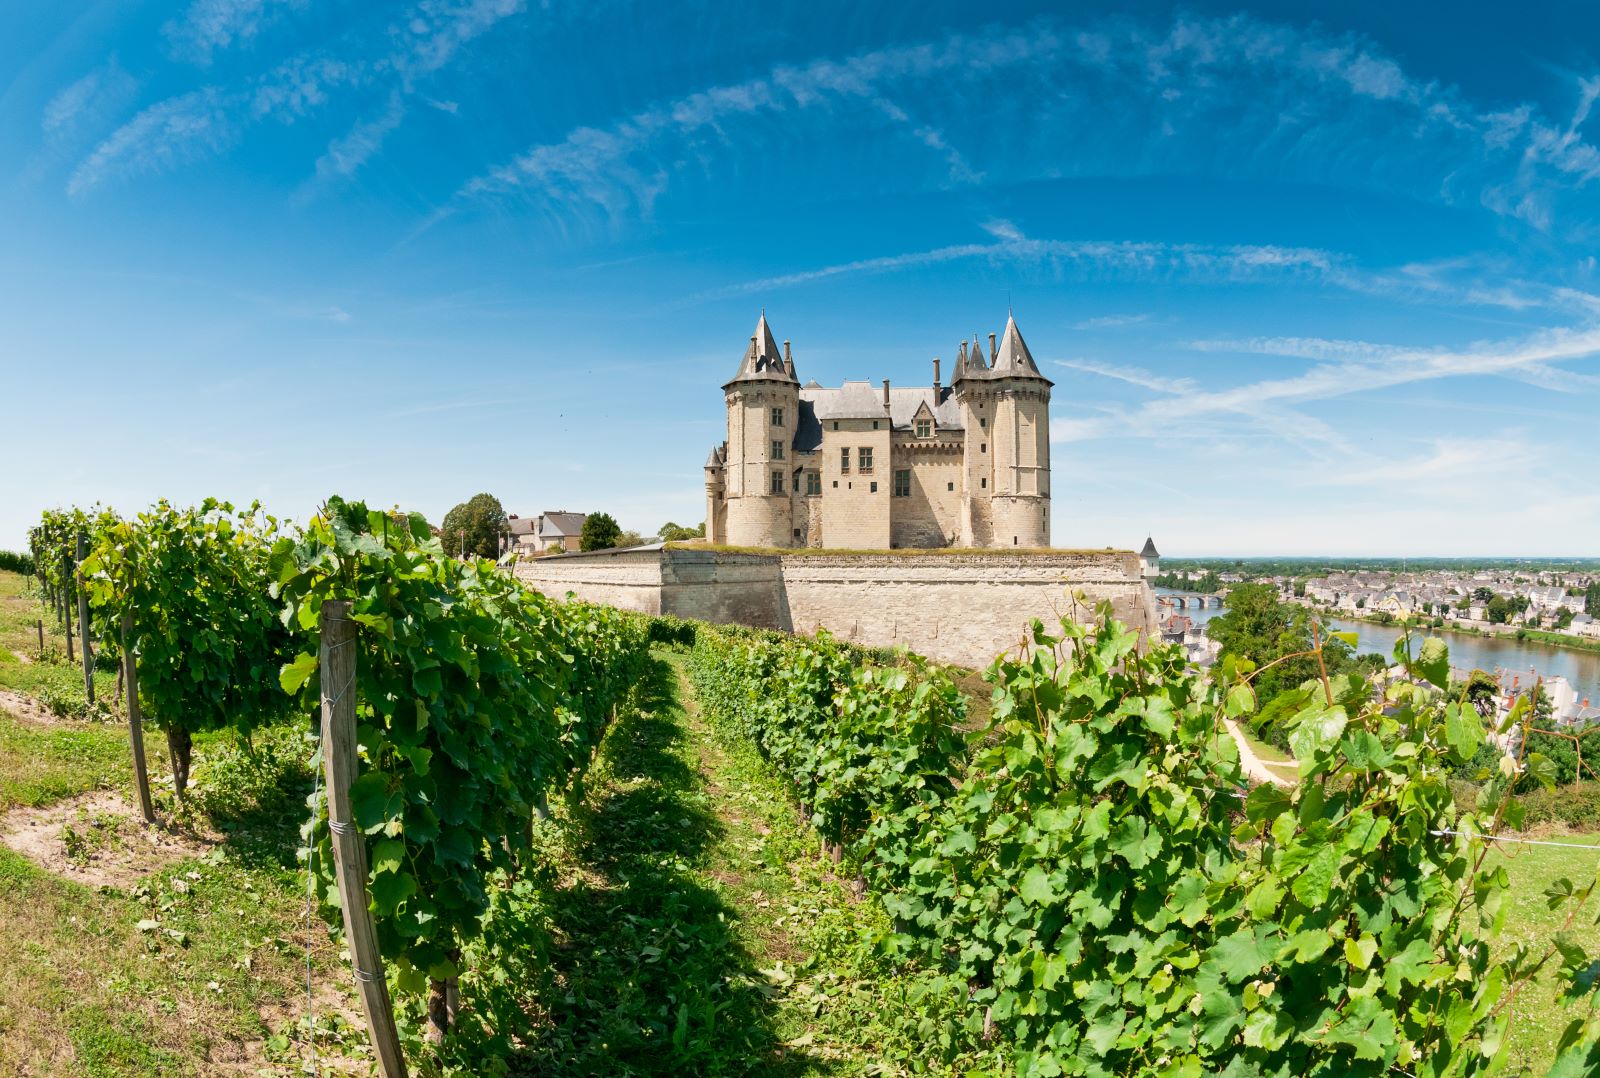 Vineyards on the grounds of Loire Valley Chateau